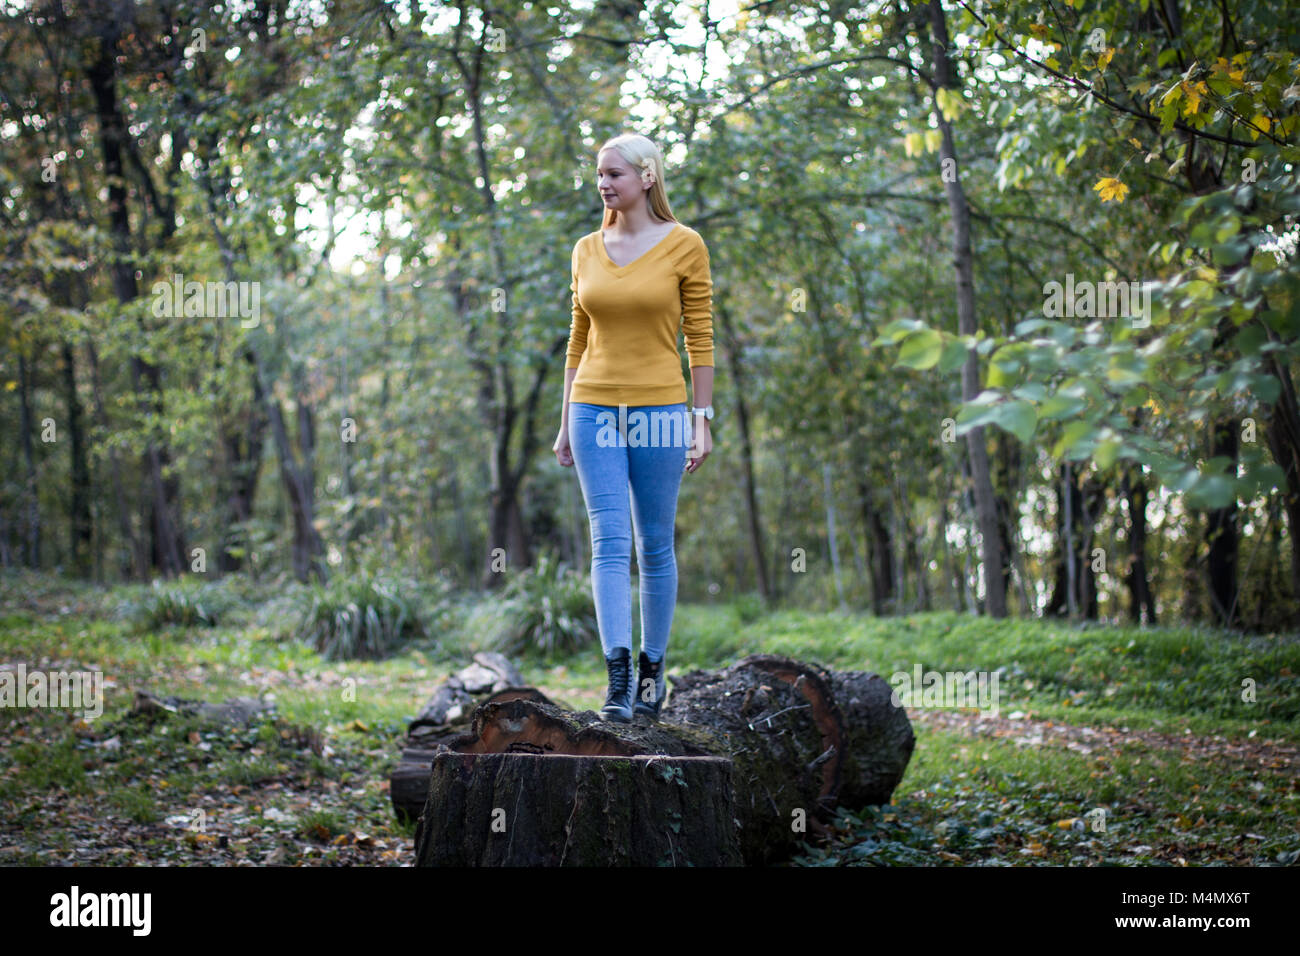 Young and beautiful blonde woman in the forest, enjoying nature. Stock Photo